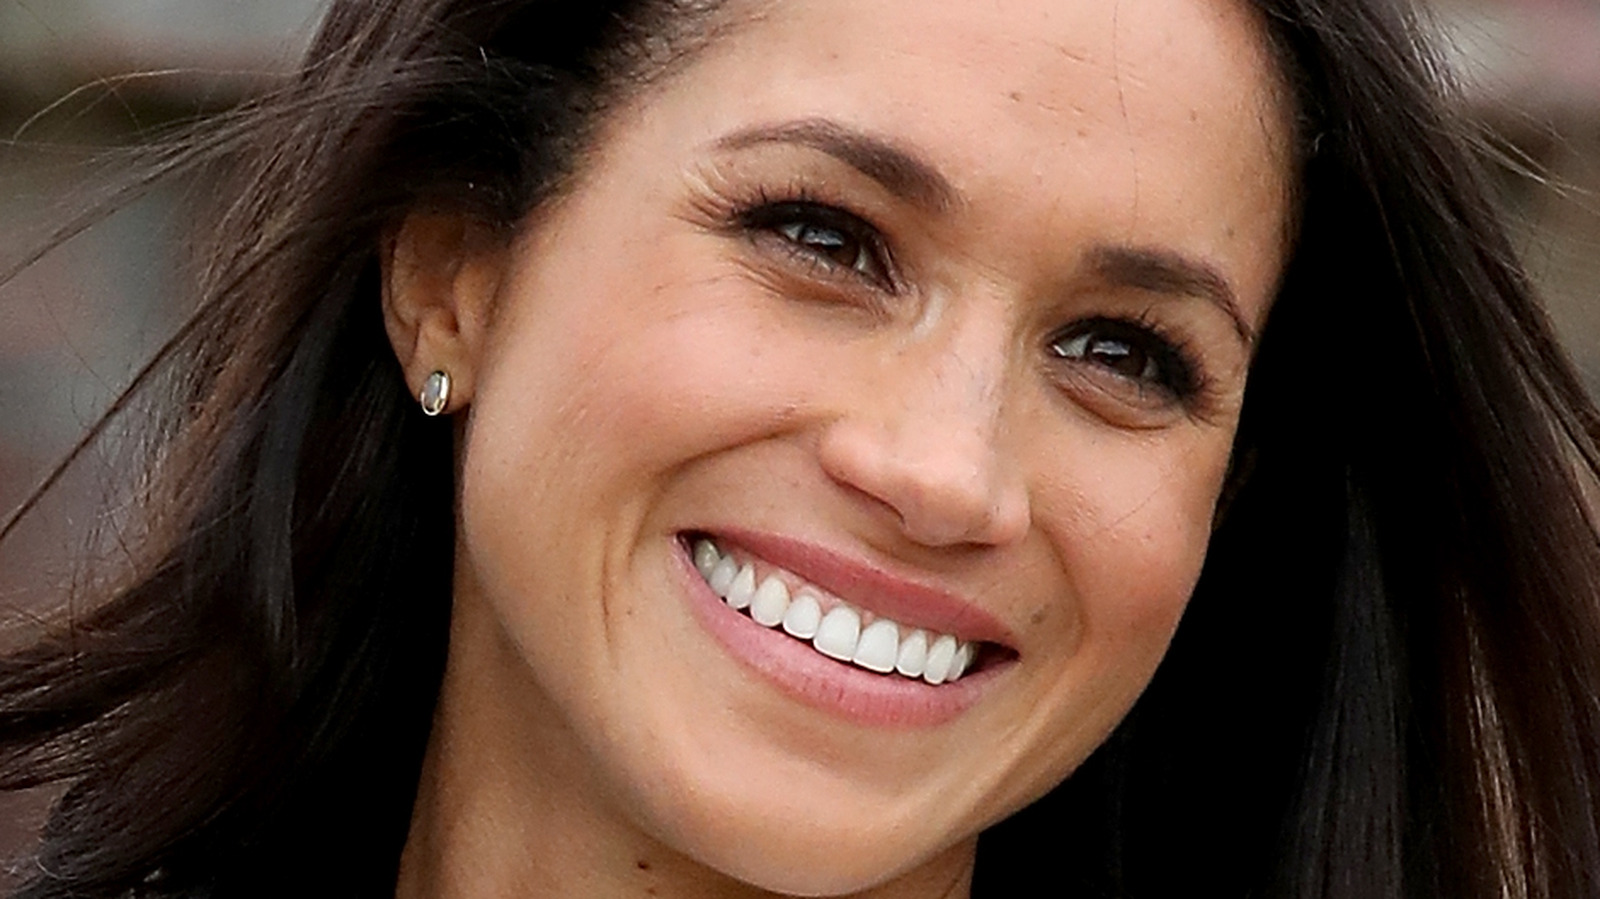 Do Meghan And Harry Ever Plan On Leaving Their Home In Santa Barbara?